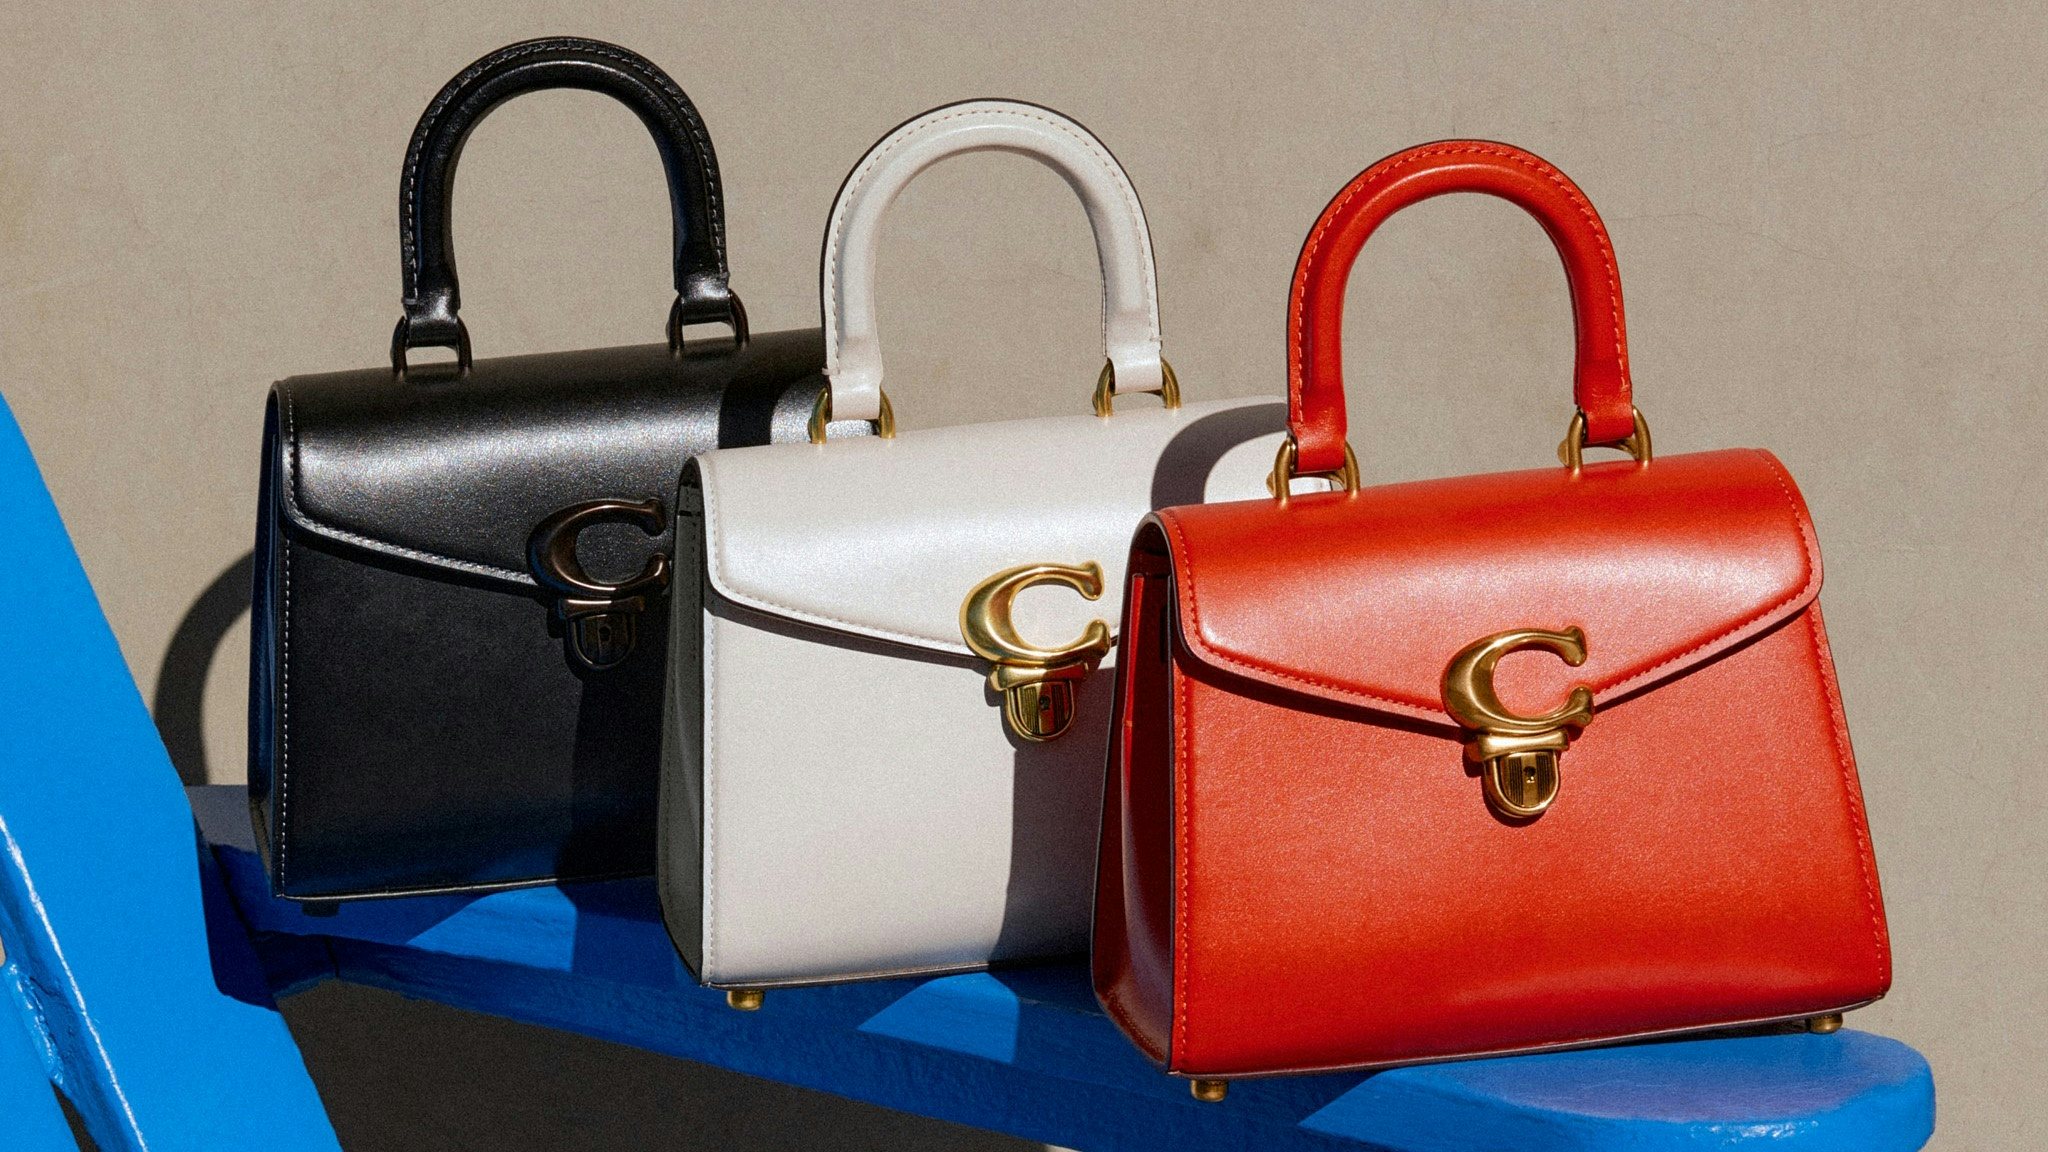 The Tapestry-Capri Holdings merger is positioned as a direct challenge to European luxury conglomerates LVMH and Kering, which have long dominated the luxury market. Photo: Coach